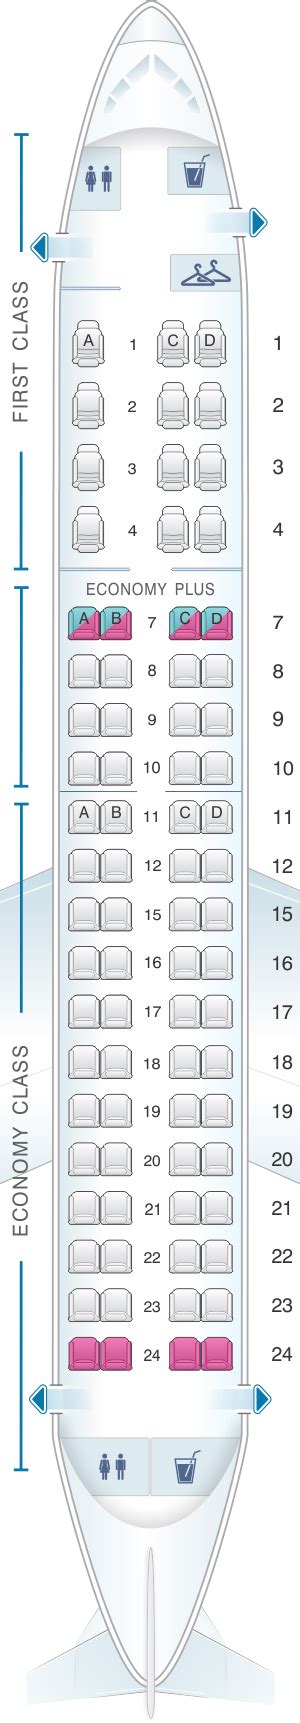 Seat Map Air Canada Embraer E175 (E75) Airplane Embraer E175 (E75) Air Canada with 2 classes and 76 seats on board. Use airplane seat map to find which ones are more comfortable and which should be avoided. Tap the seat on the map to see the details.. 